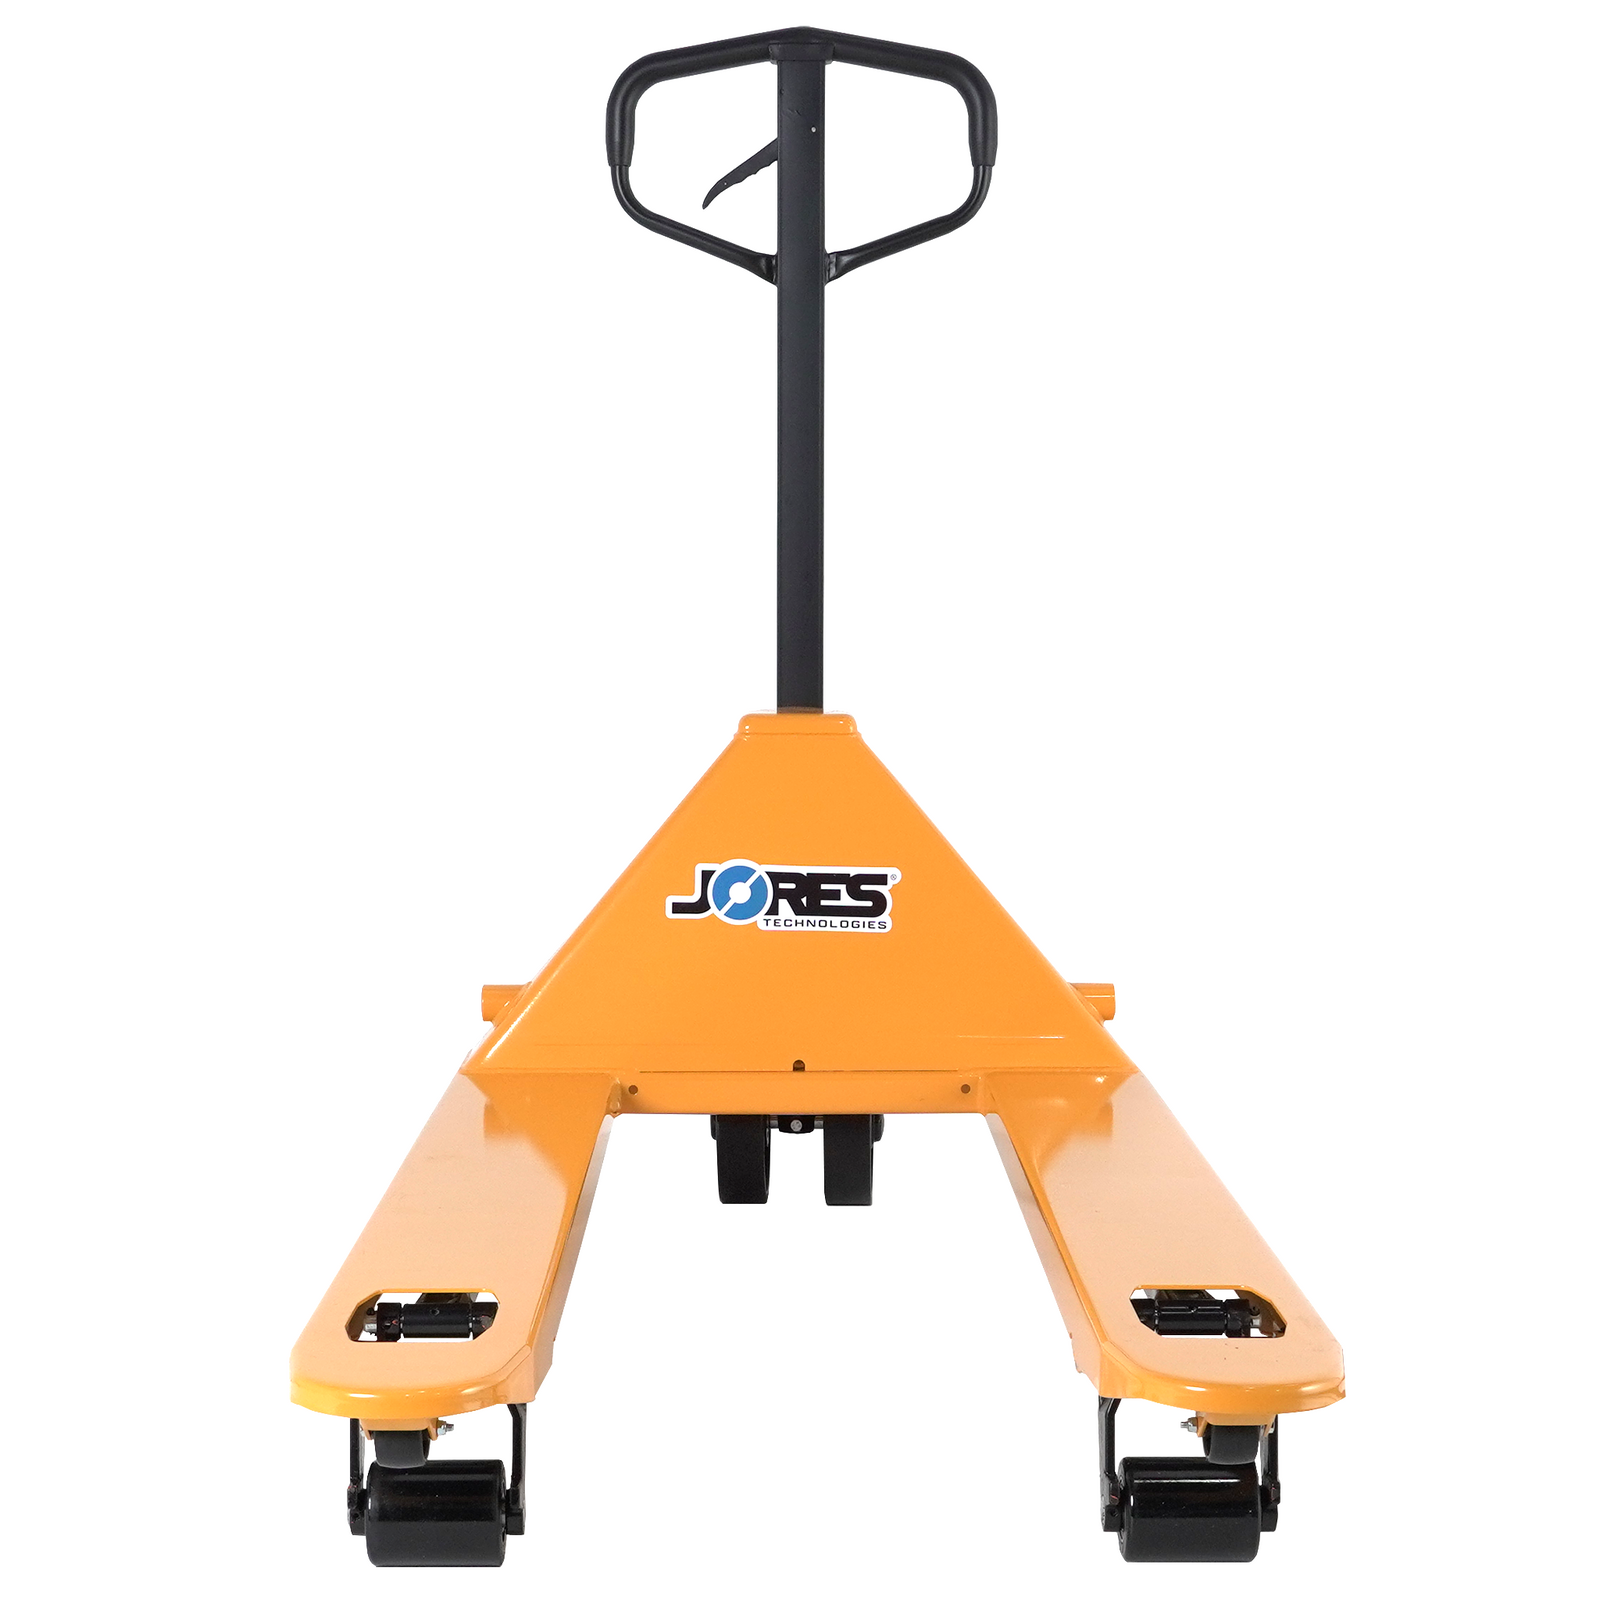 Back and yellow pallet jack for 5500 LBS by JORES TECHNOLOGIES®